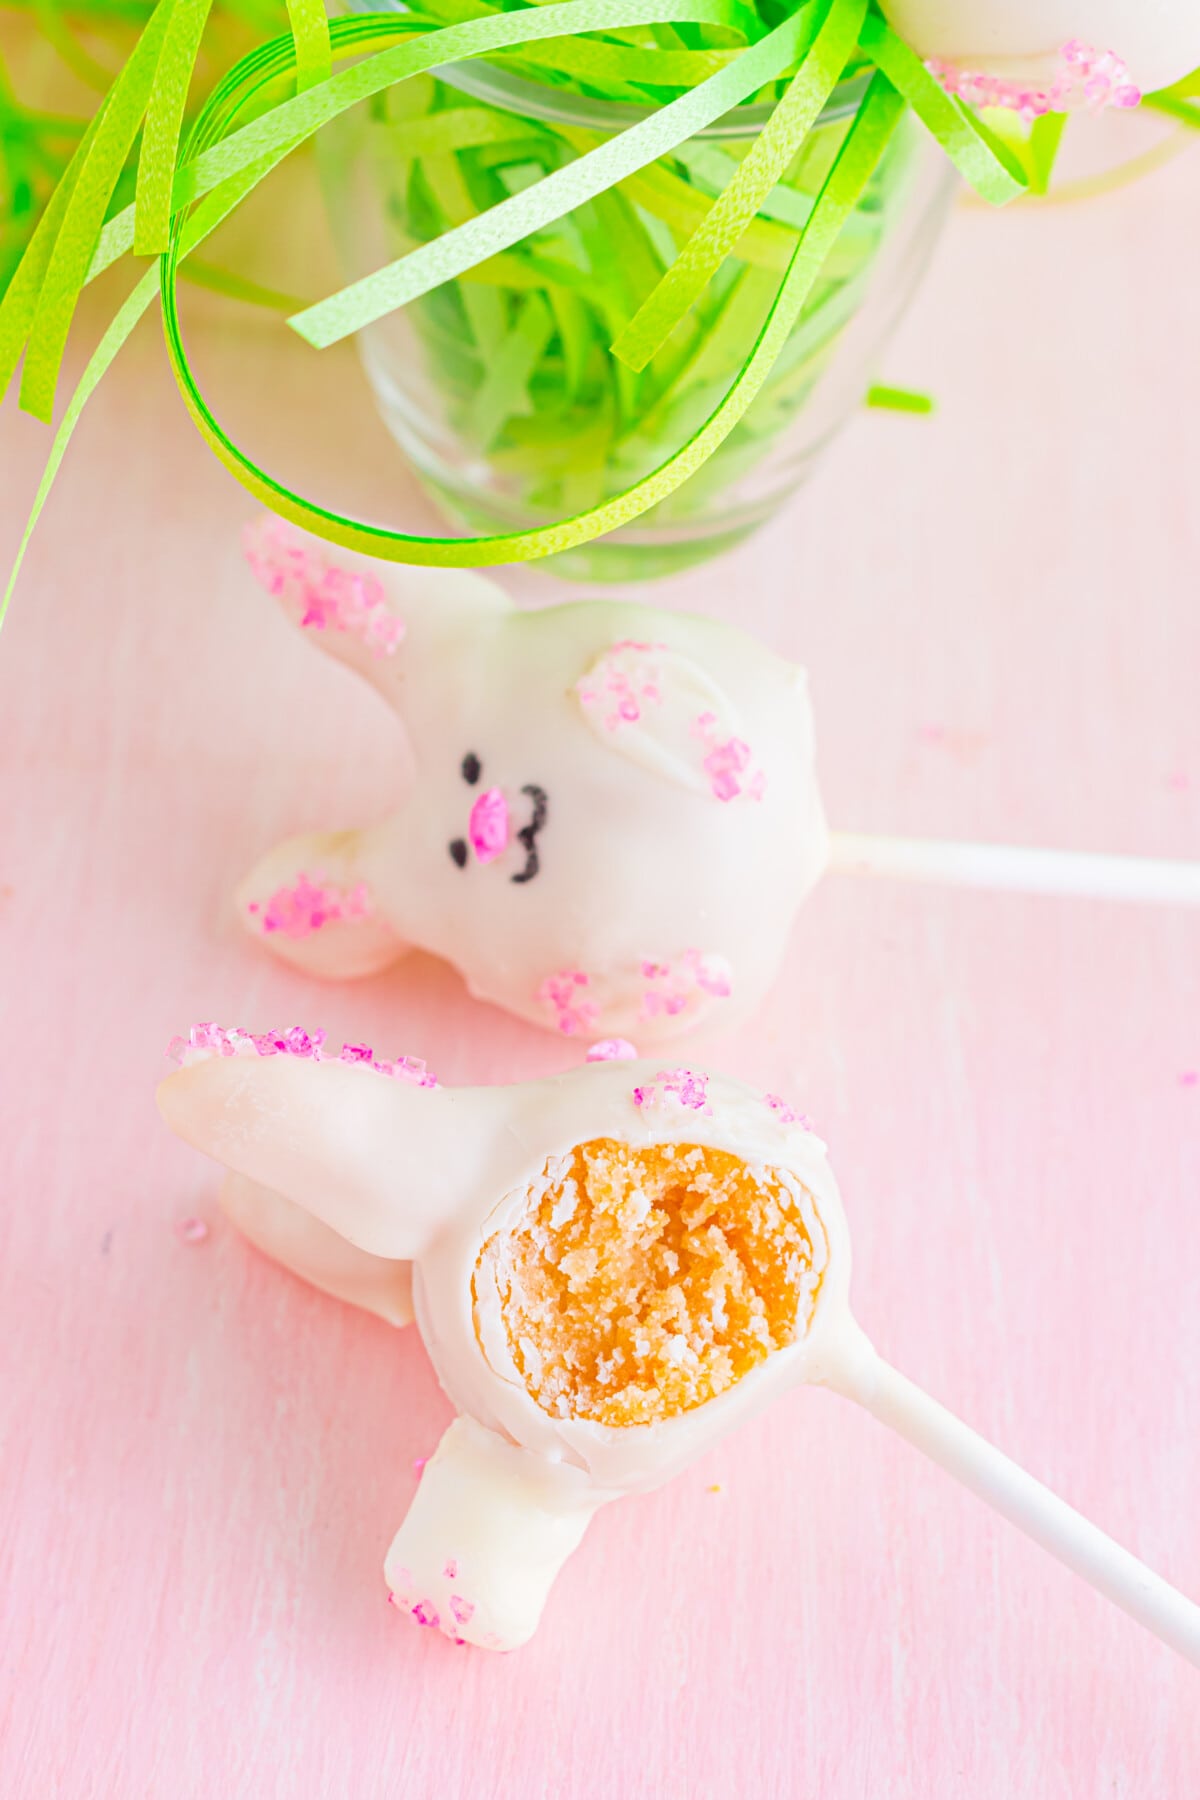 Easter Cake Pops cut in half to reveal the inside.